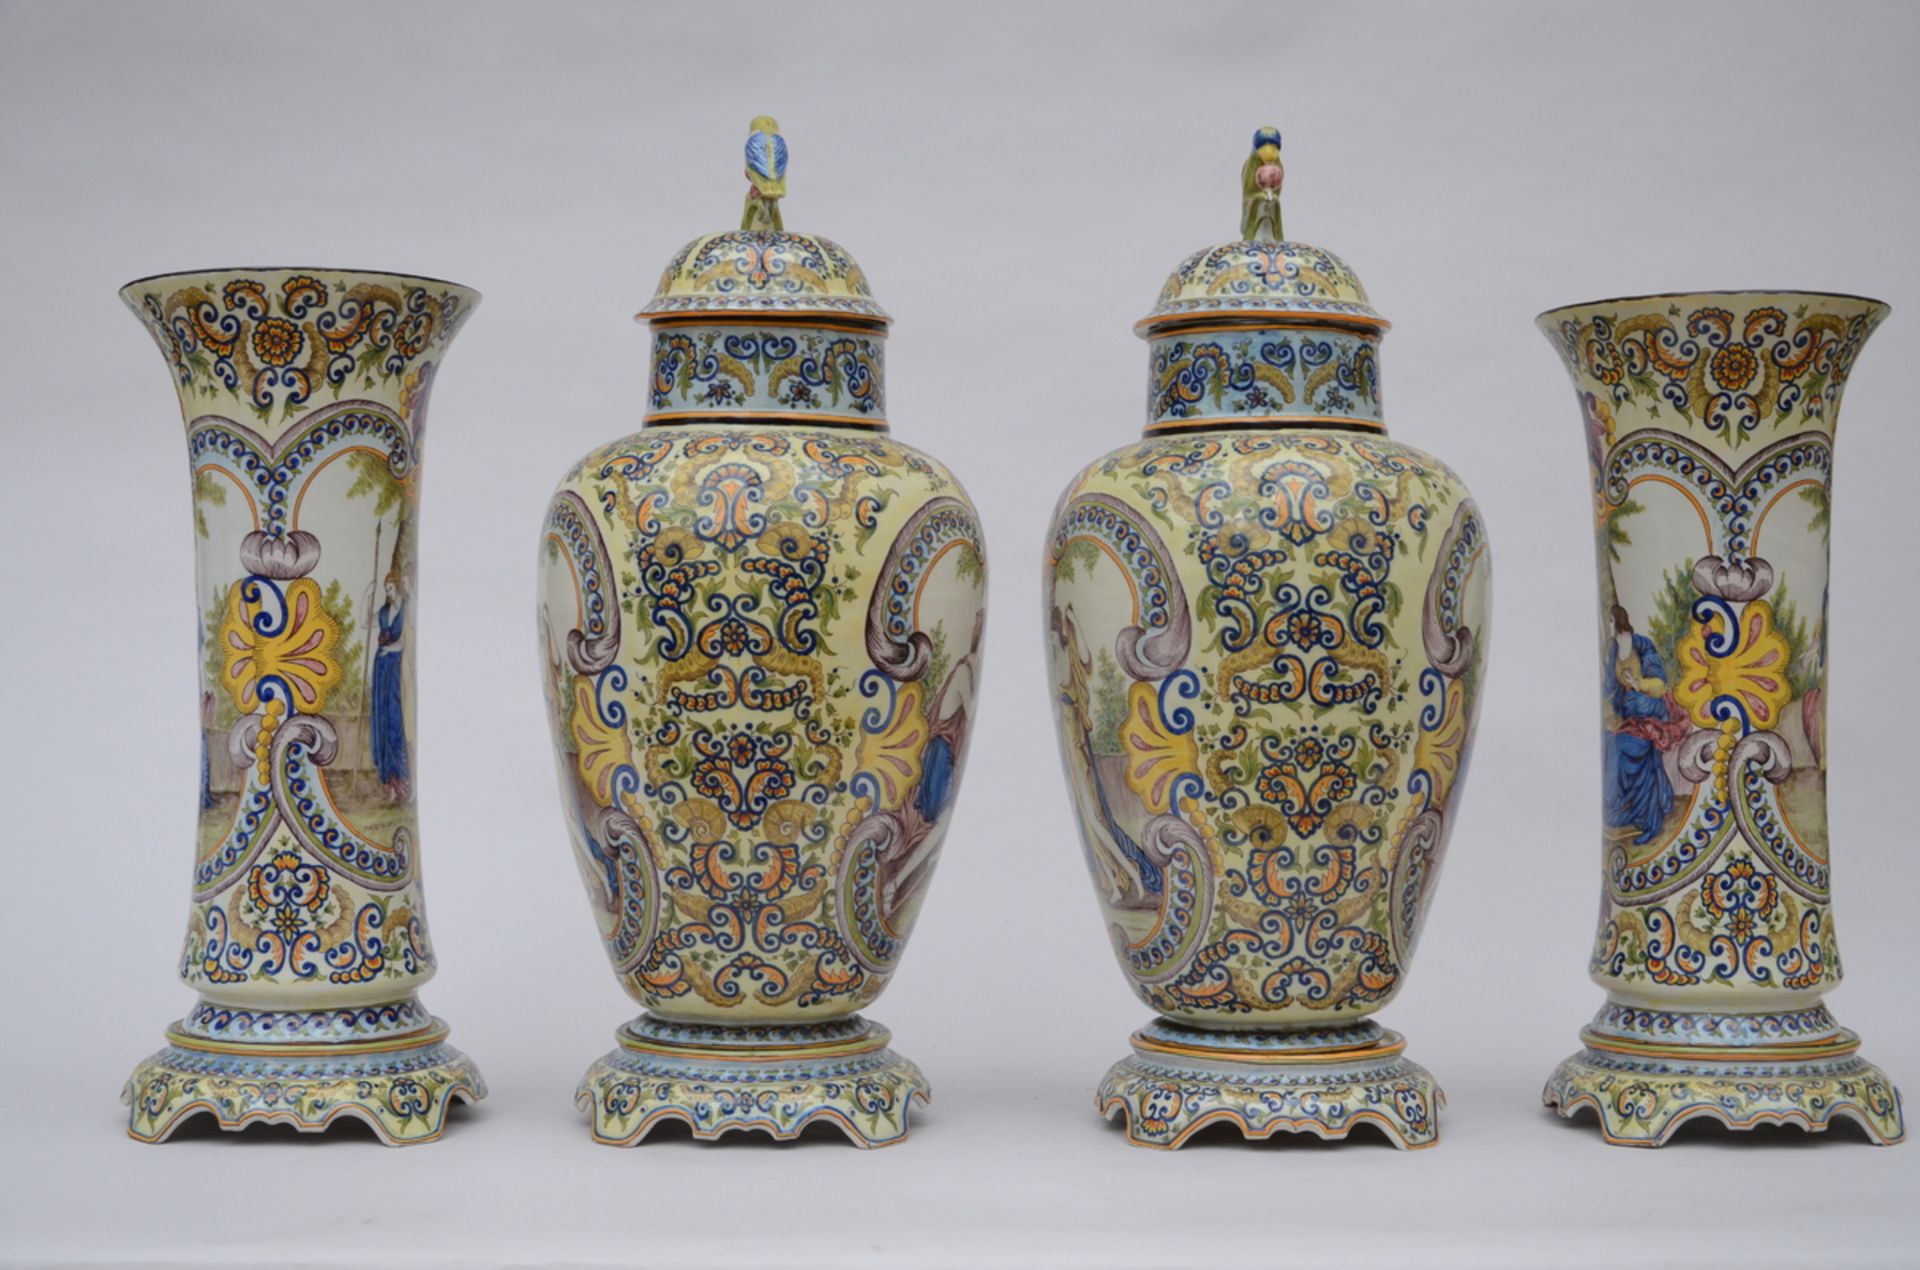 Large four-piece set in Desvres faience by Jules Fourmaintraux (73cm and 60cm) (*) - Image 4 of 7